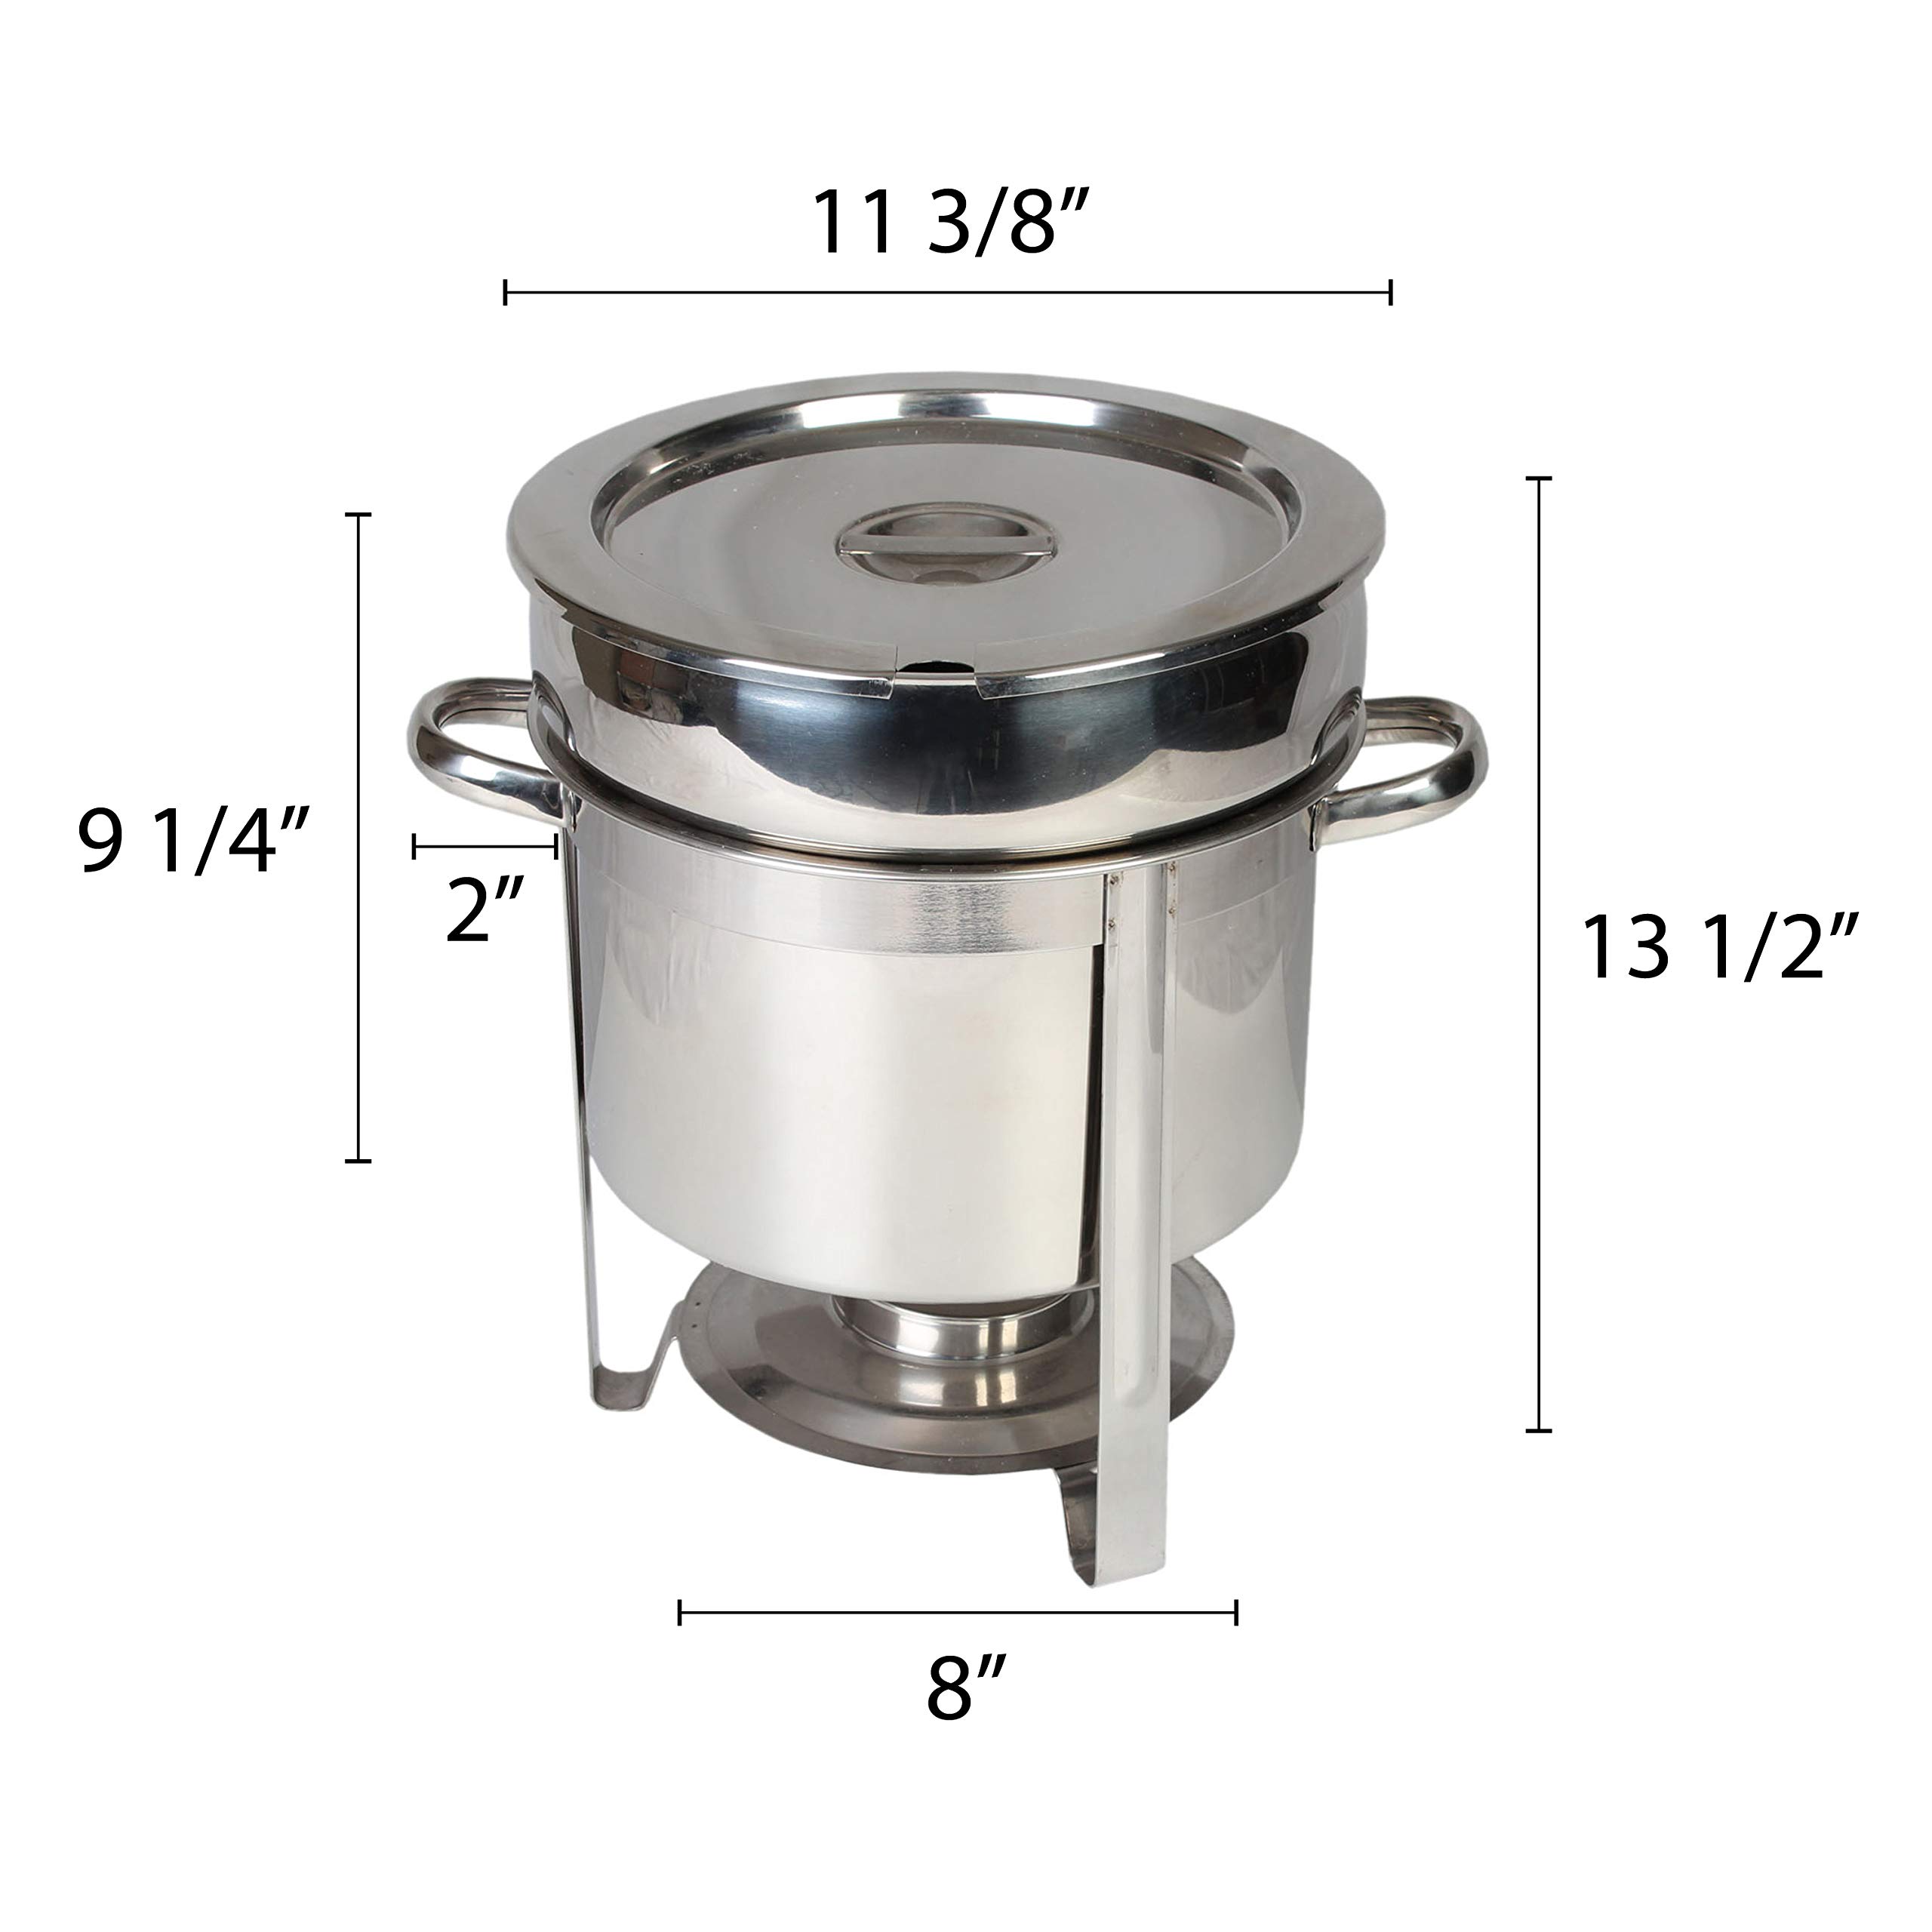 Thunder Group SLRCF8311 Marmite Chafer, 11 quart, 14-1/2" x 11-1/8" x 13-1/4"H, round, welded frame, lift-off lid, water pan, fuel holder, stainless steel, mirror-finish